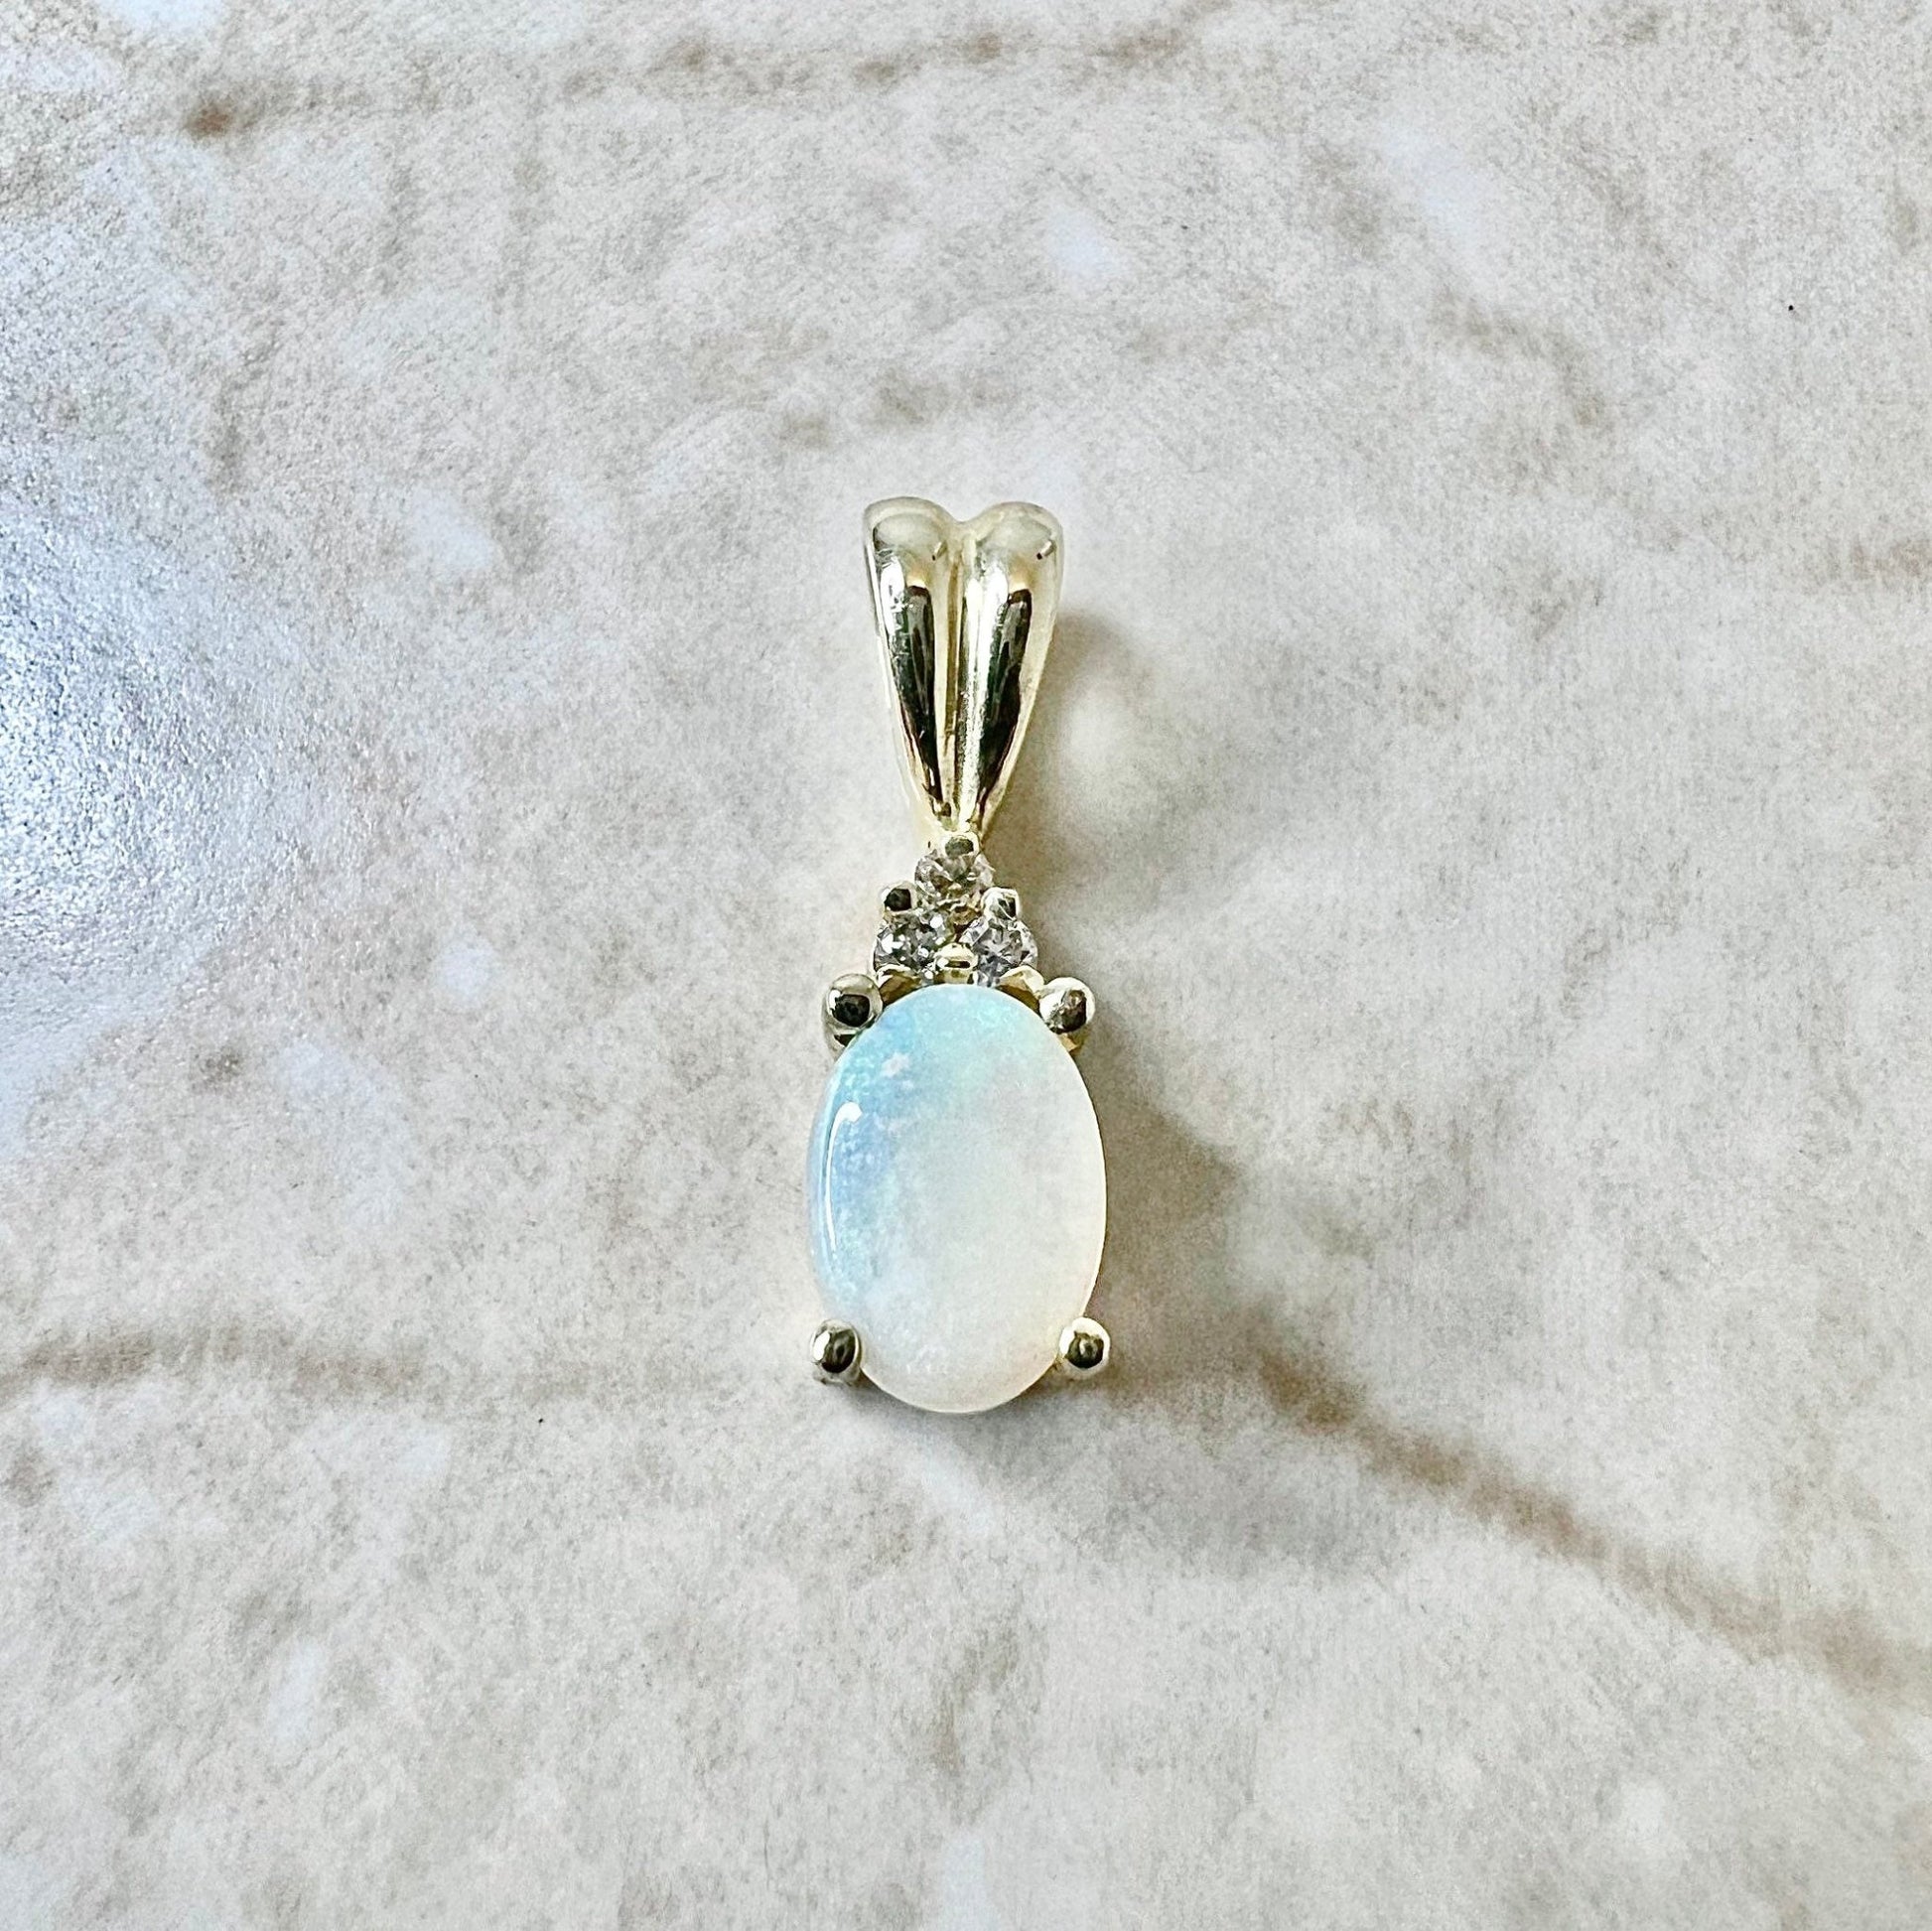 Vintage 14K Natural Opal & Diamond Pendant Necklace - Yellow Gold Opal Pendant - October Birthstone - Birthday Gift For Her - Jewelry Sale